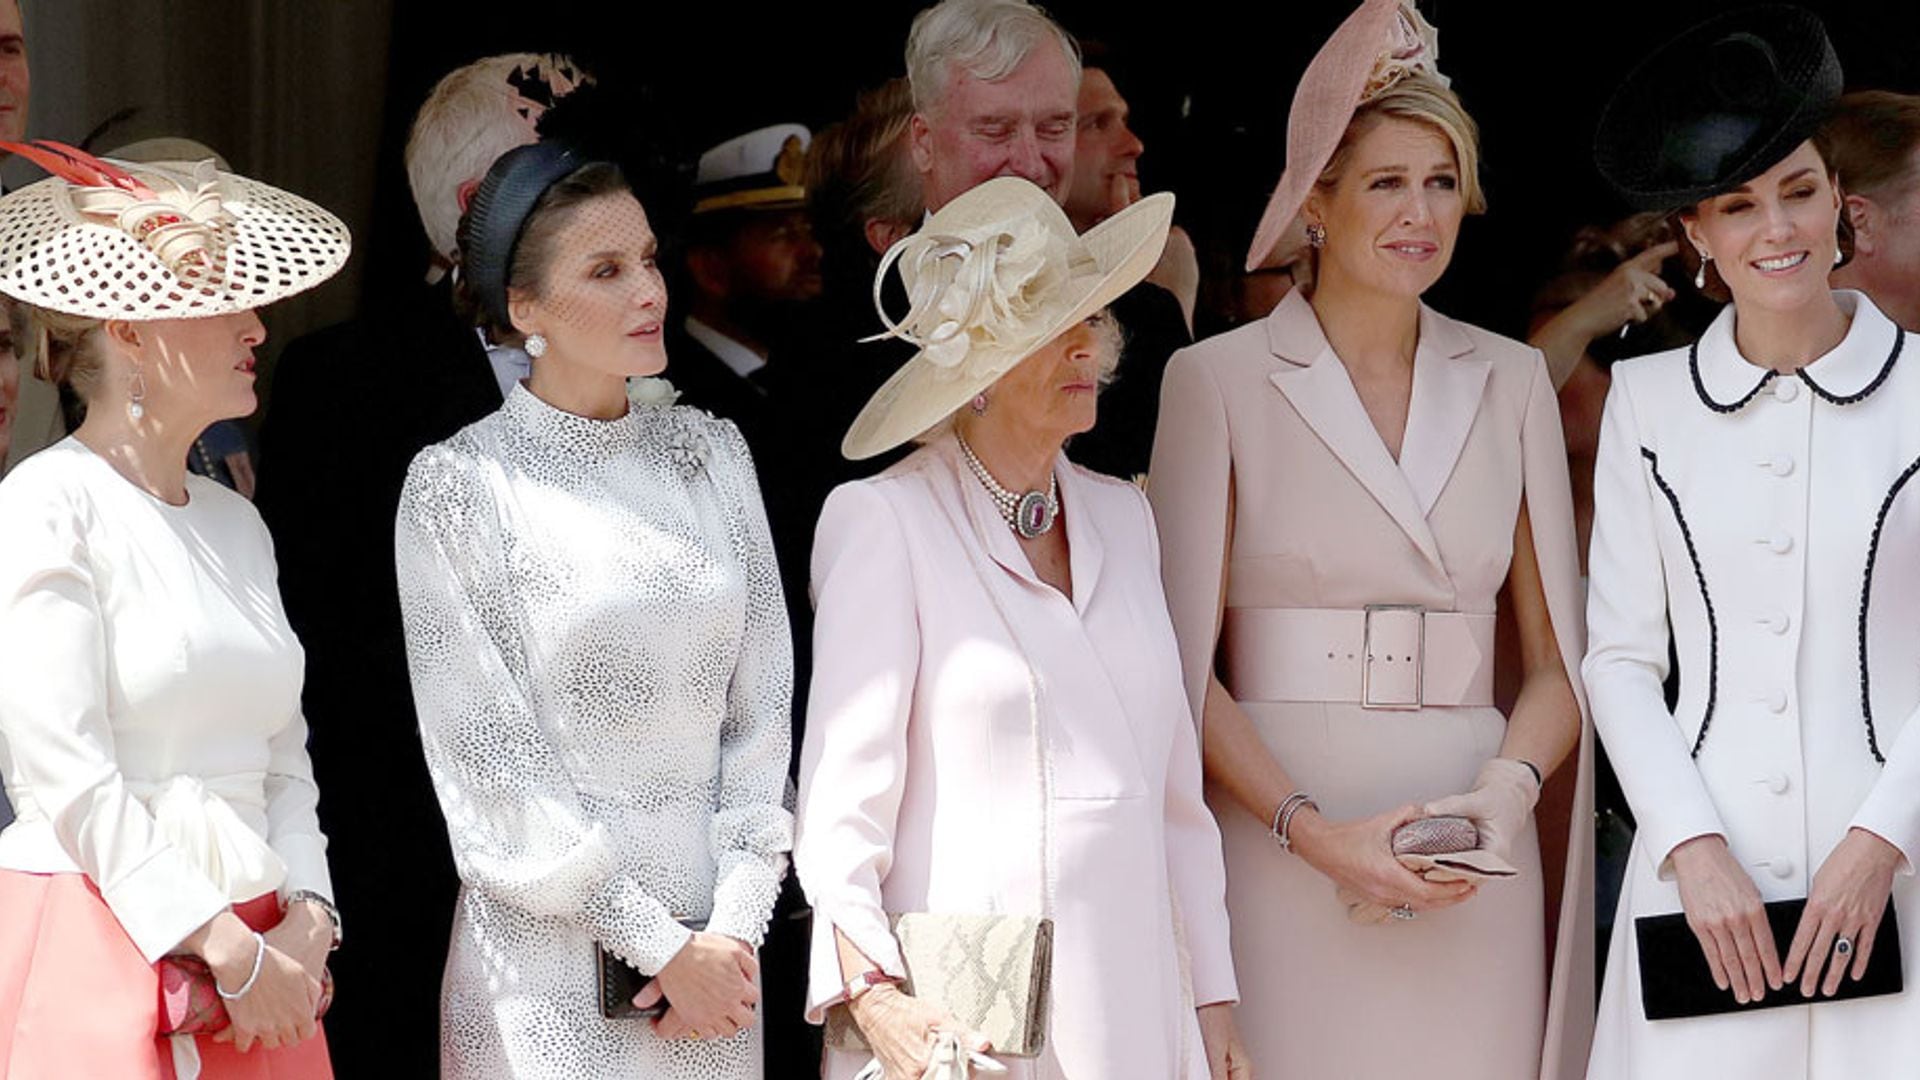 Royal Style: From peachy hues to classic black and white, see what royals wore to annual regal event